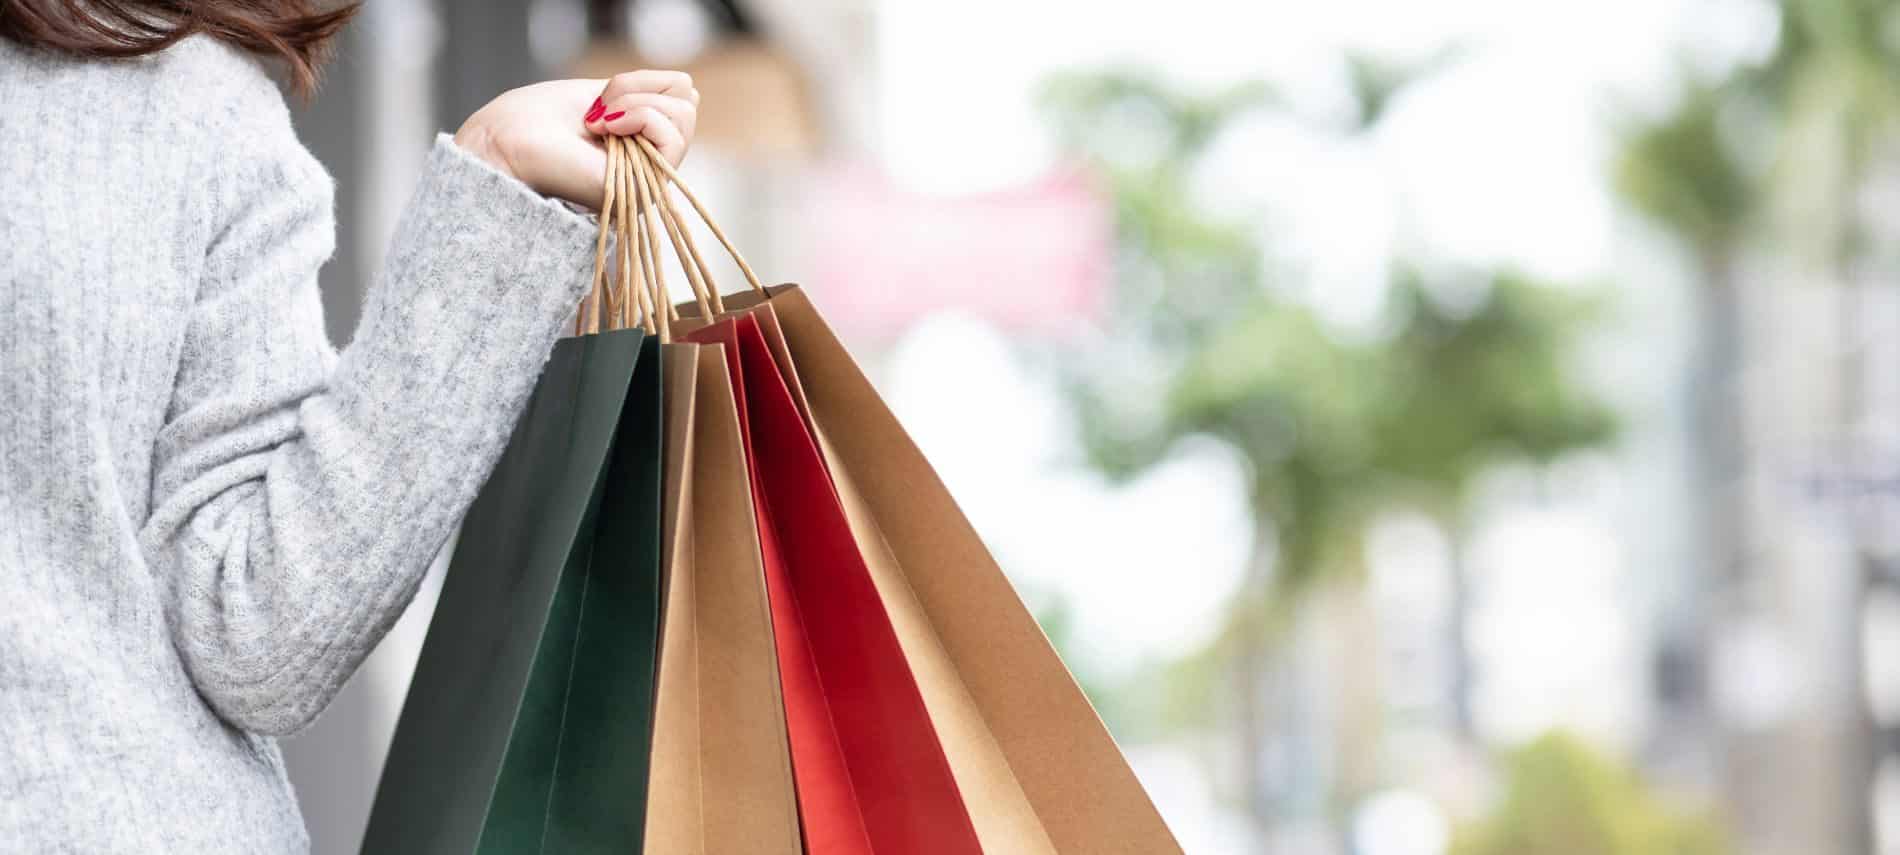 A woman in a grey sweater holds red, green, and brown shopping bags